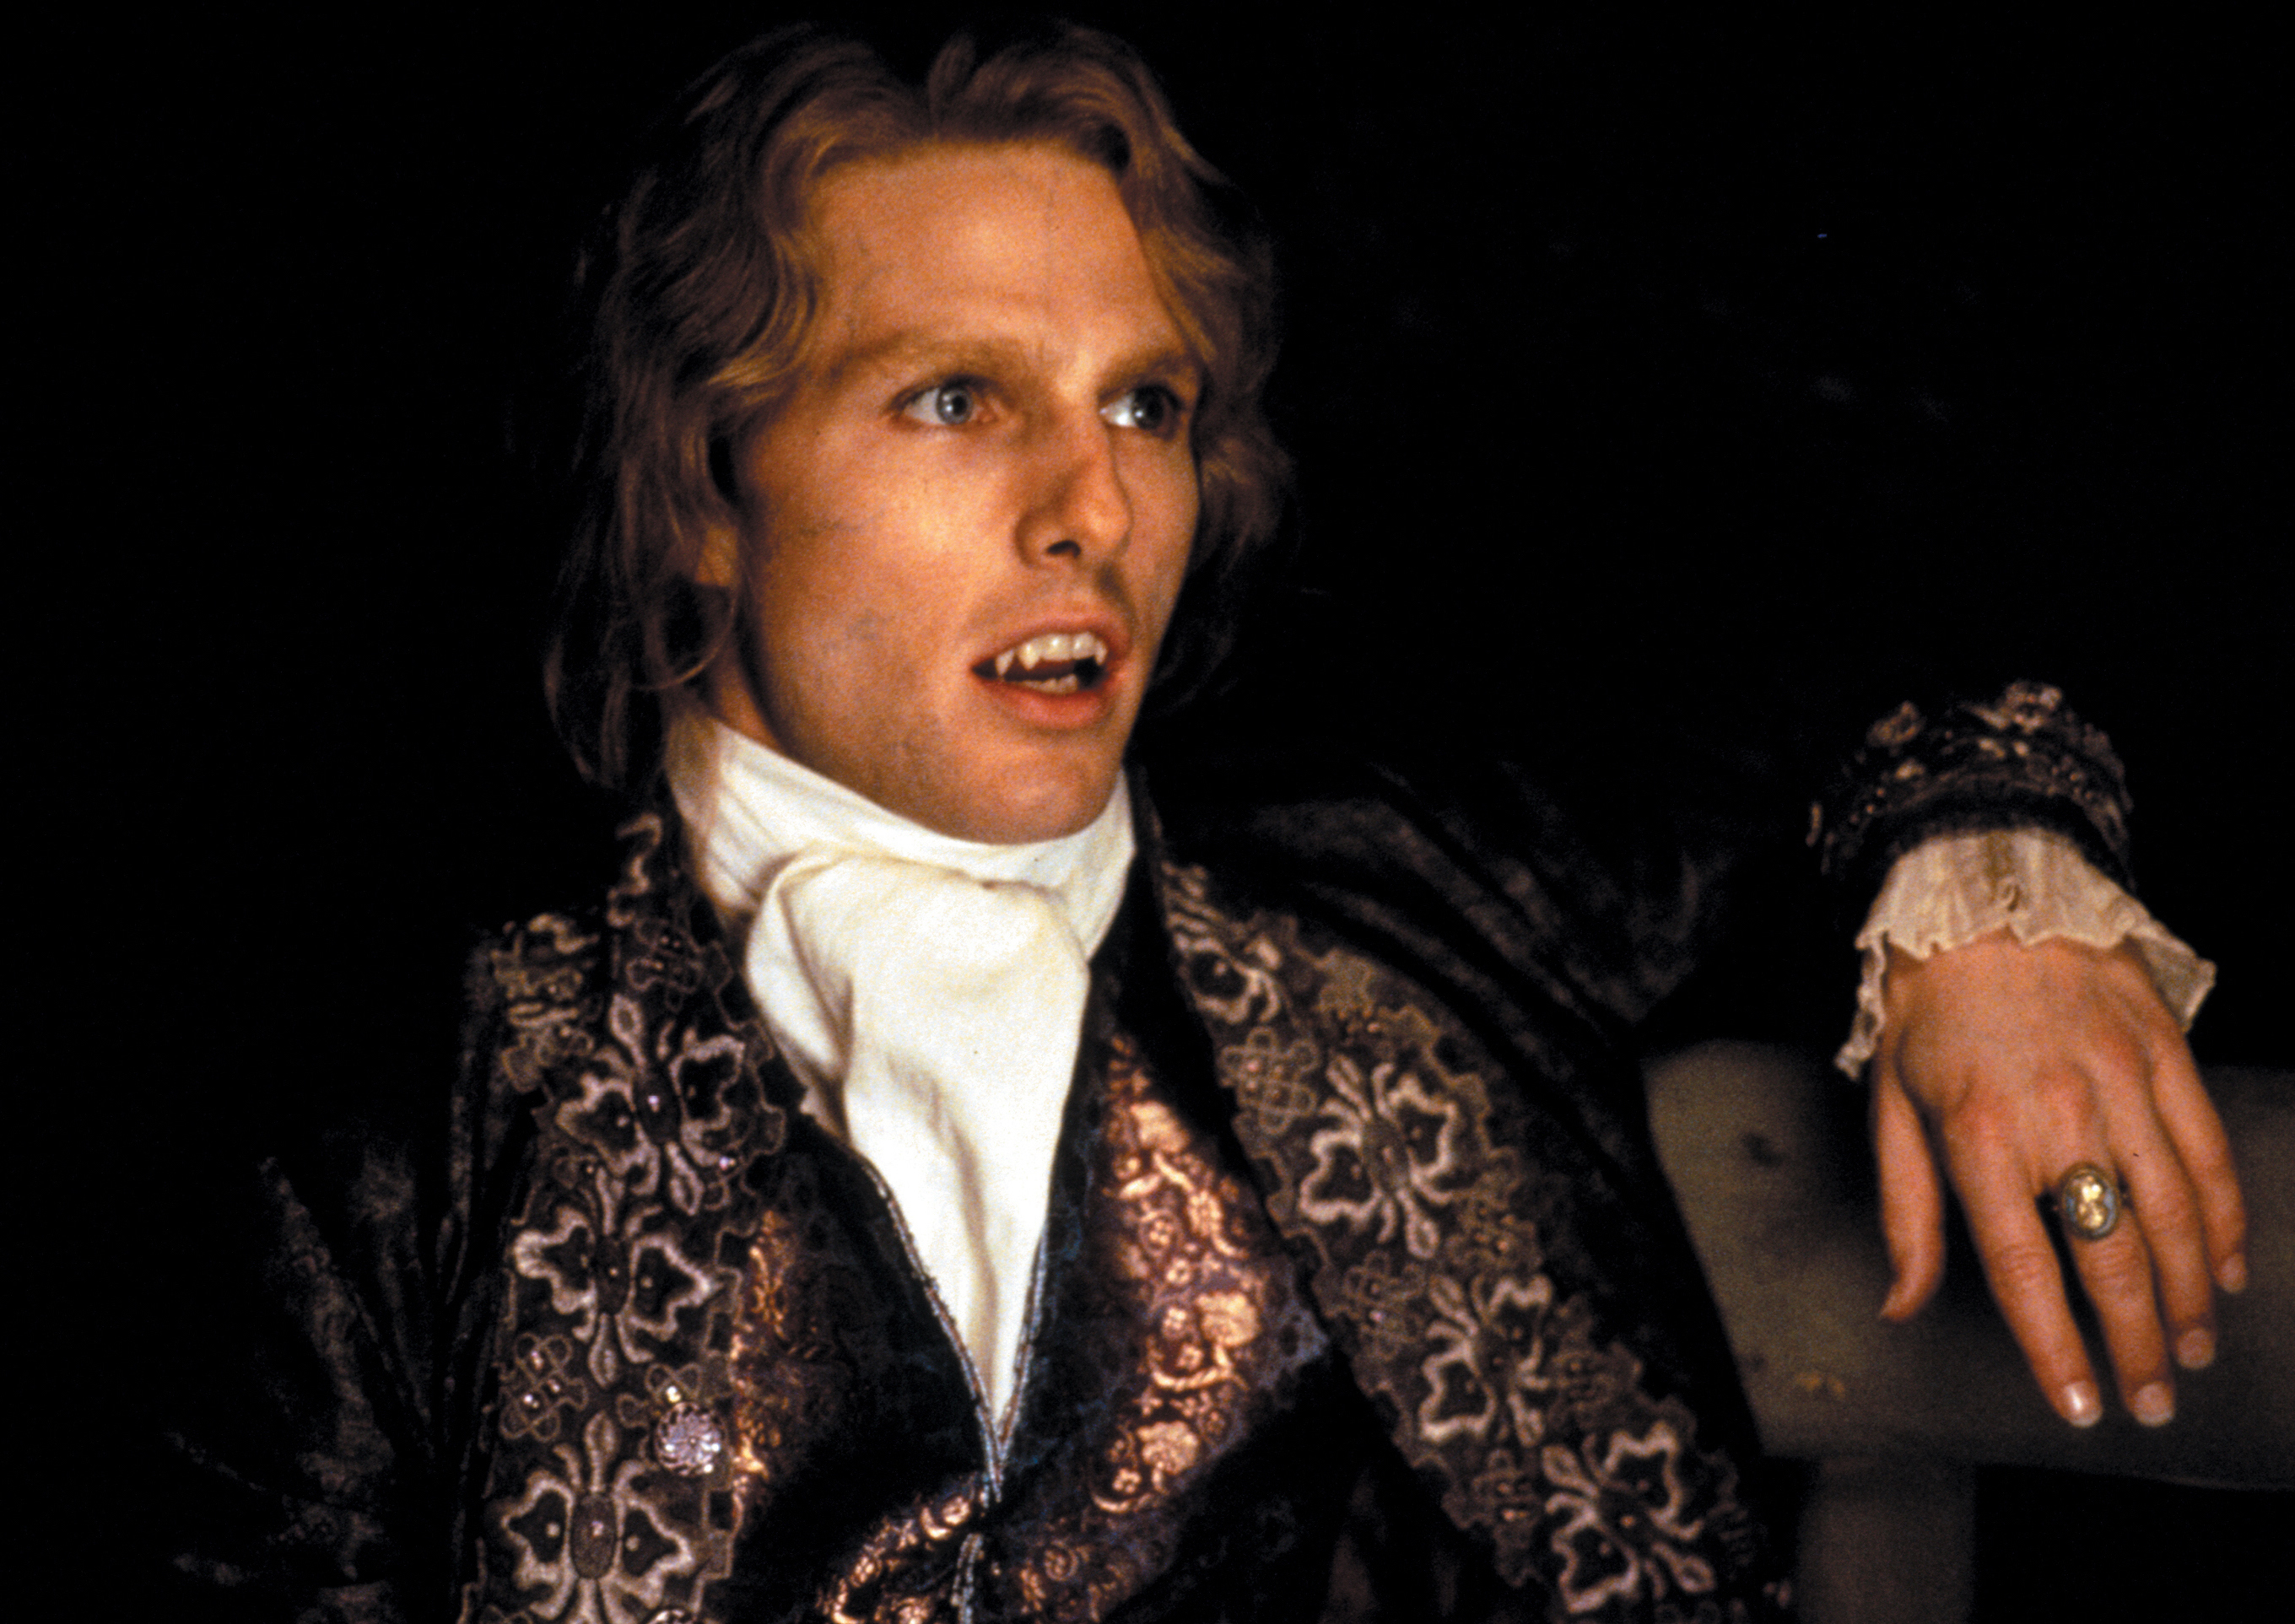 <p>In 1994, Tom Cruise starred alongside fellow A-listers Brad Pitt, Antonio Banderas and Christian Slater in "Interview With the Vampire." He received rave reviews for his performance as Lestat de Lioncourt in the film, which grossed more than $233 million.</p>